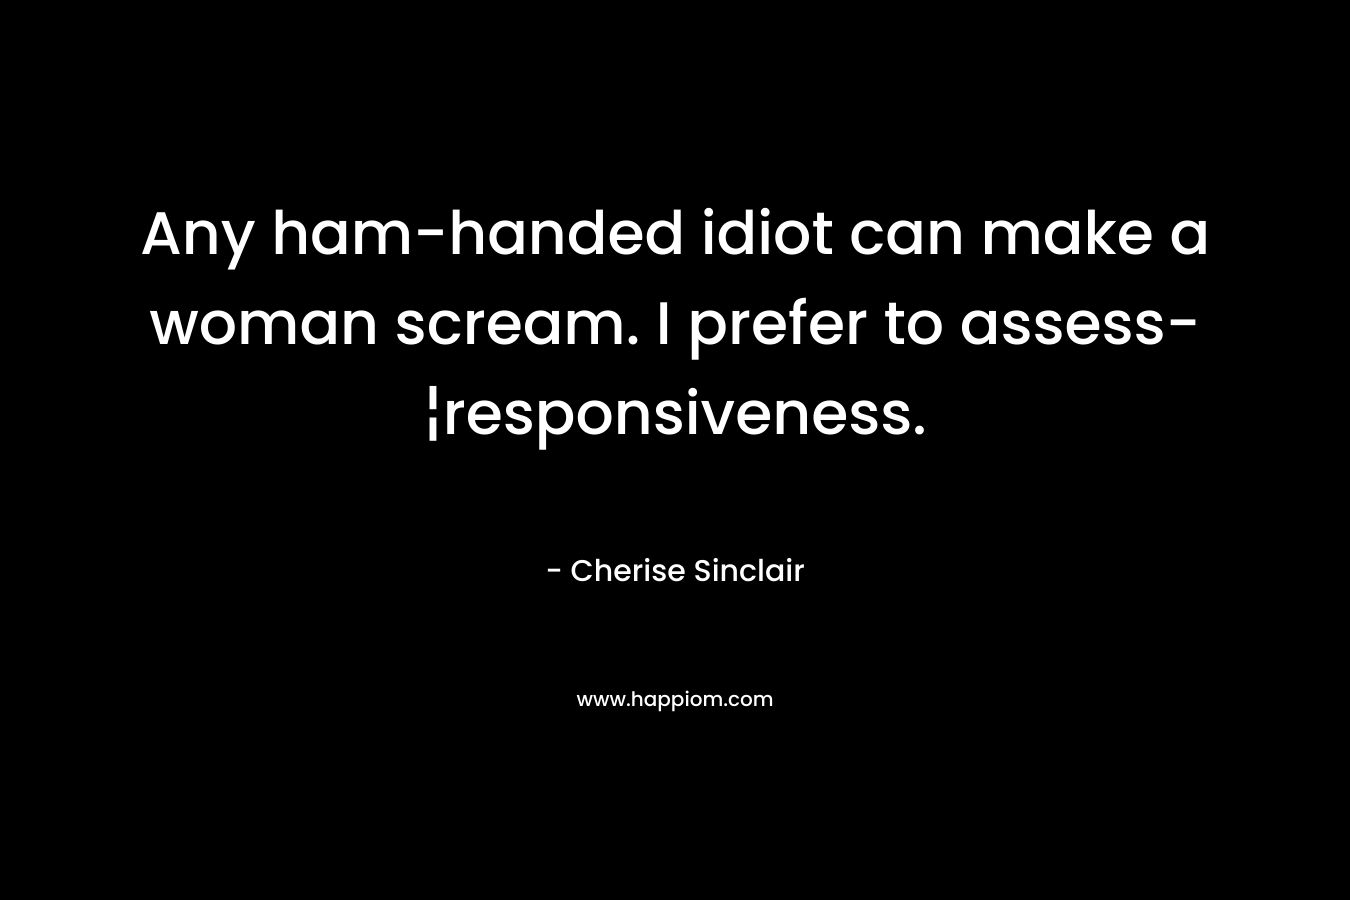 Any ham-handed idiot can make a woman scream. I prefer to assess-¦responsiveness. – Cherise Sinclair